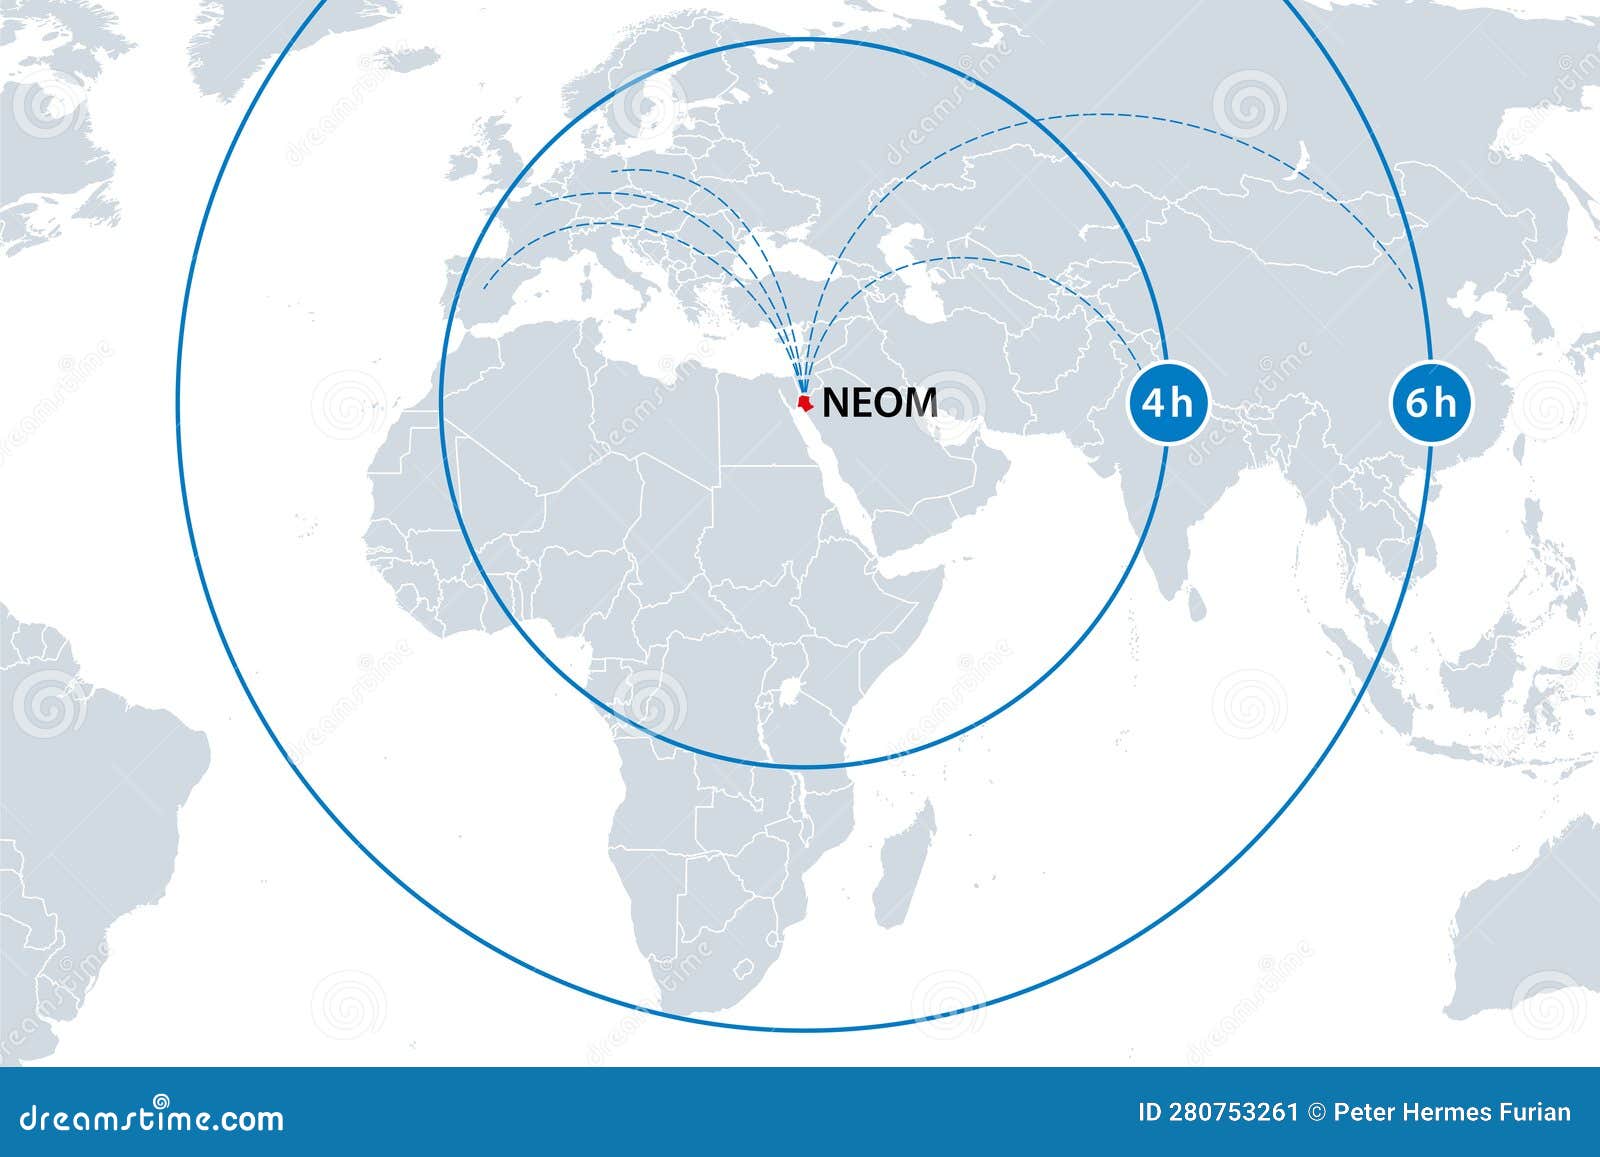 neom, short distance flights to major cities within 4 to 6 hours, map